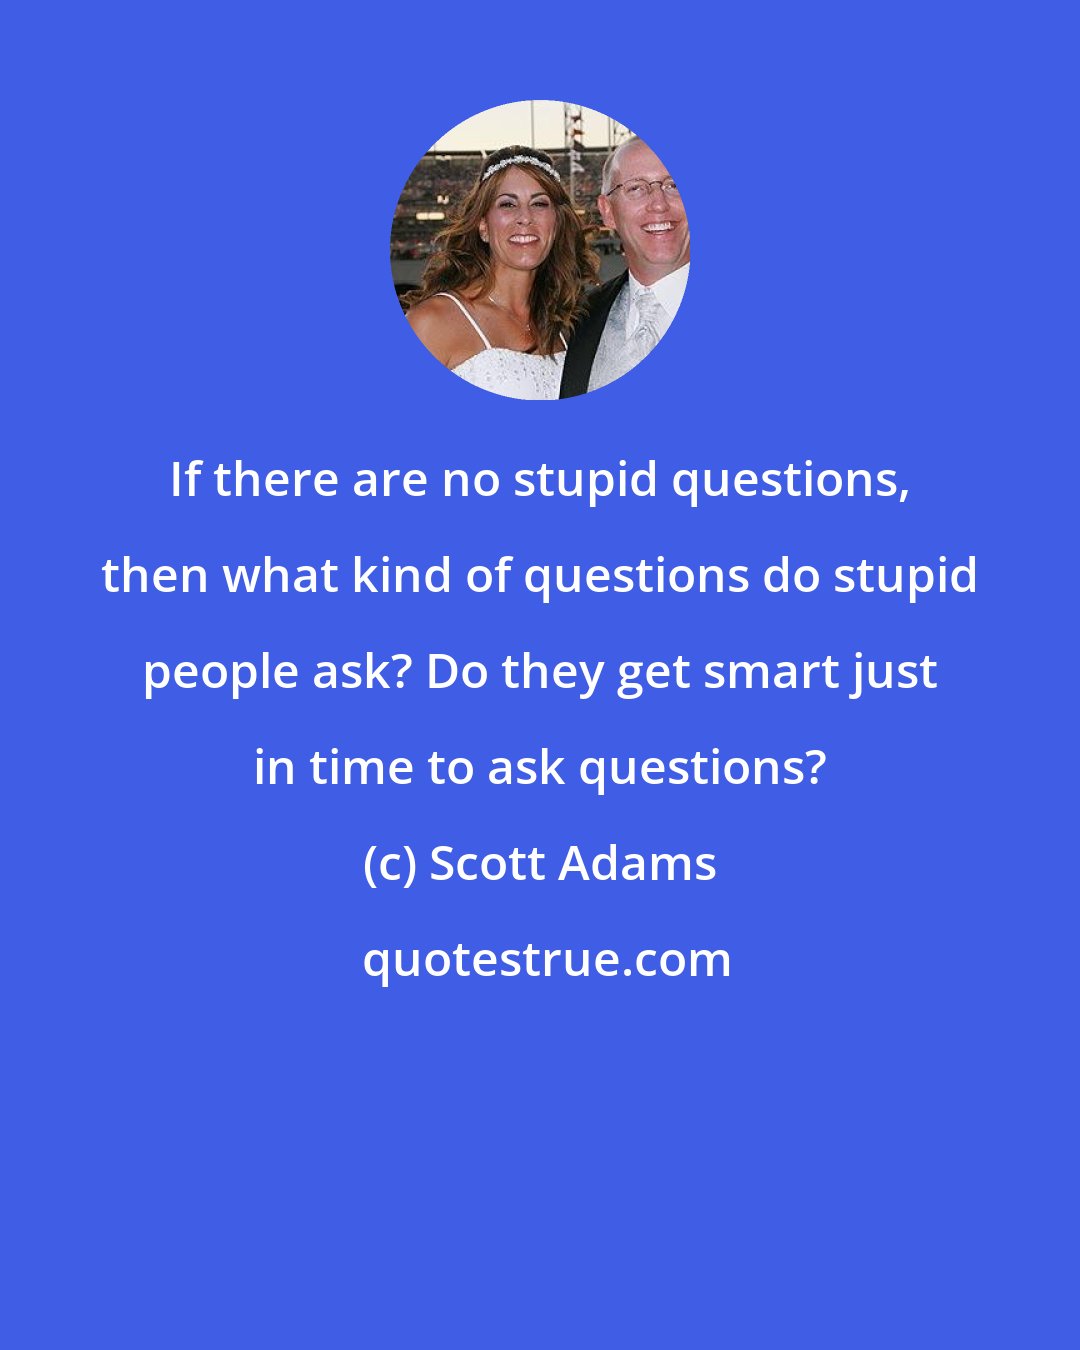 Scott Adams: If there are no stupid questions, then what kind of questions do stupid people ask? Do they get smart just in time to ask questions?